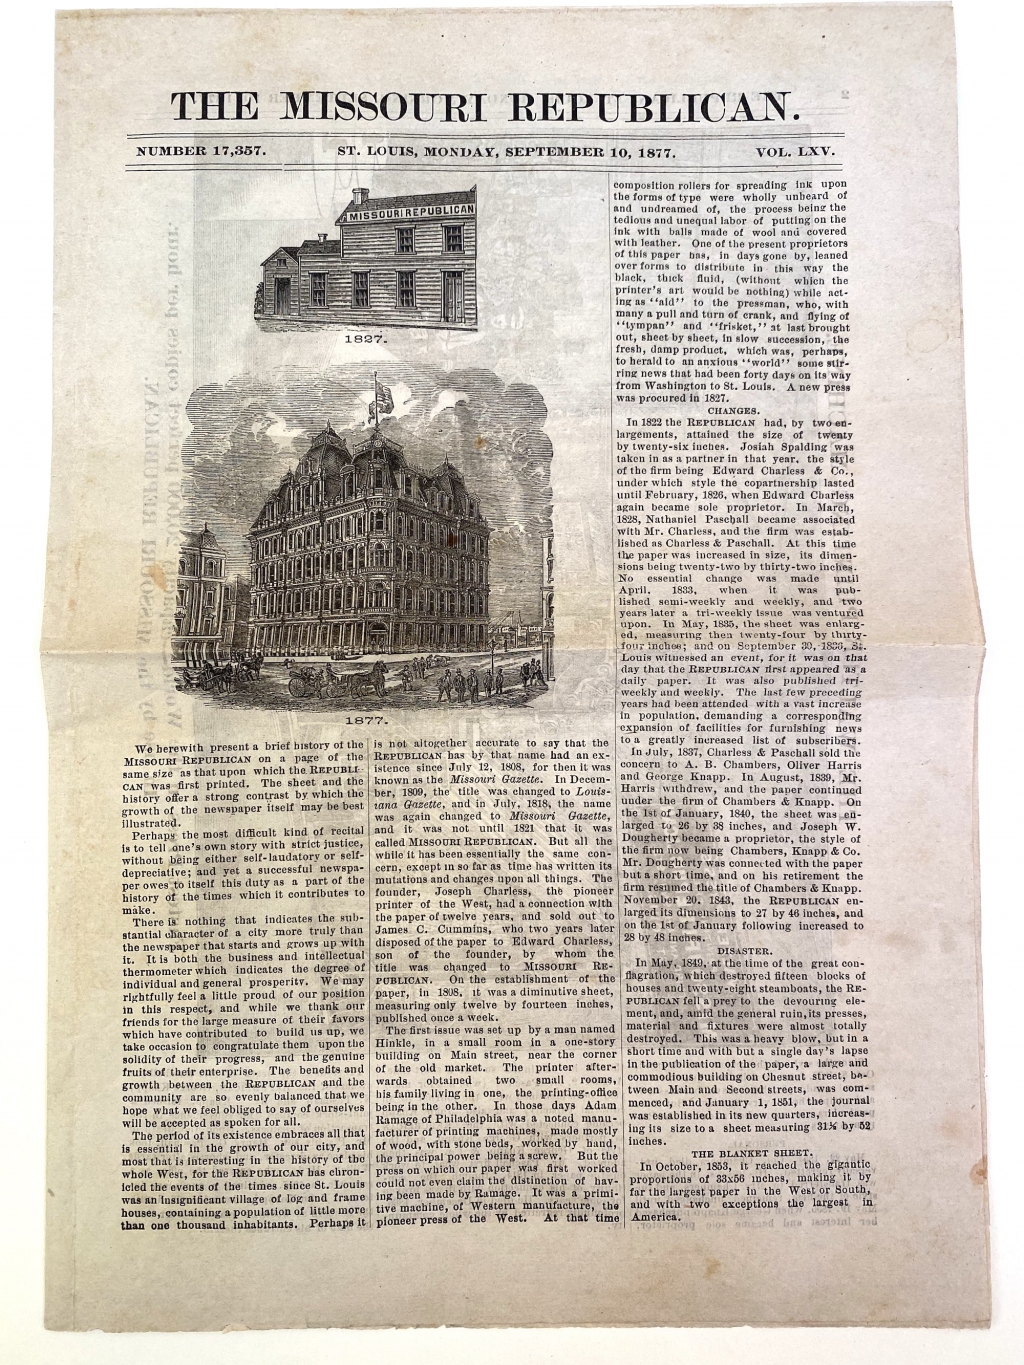 On this commemorative issue the newspaper illustrated a view of its basic small offices in 1827 as compared to its tower offices in 1877.